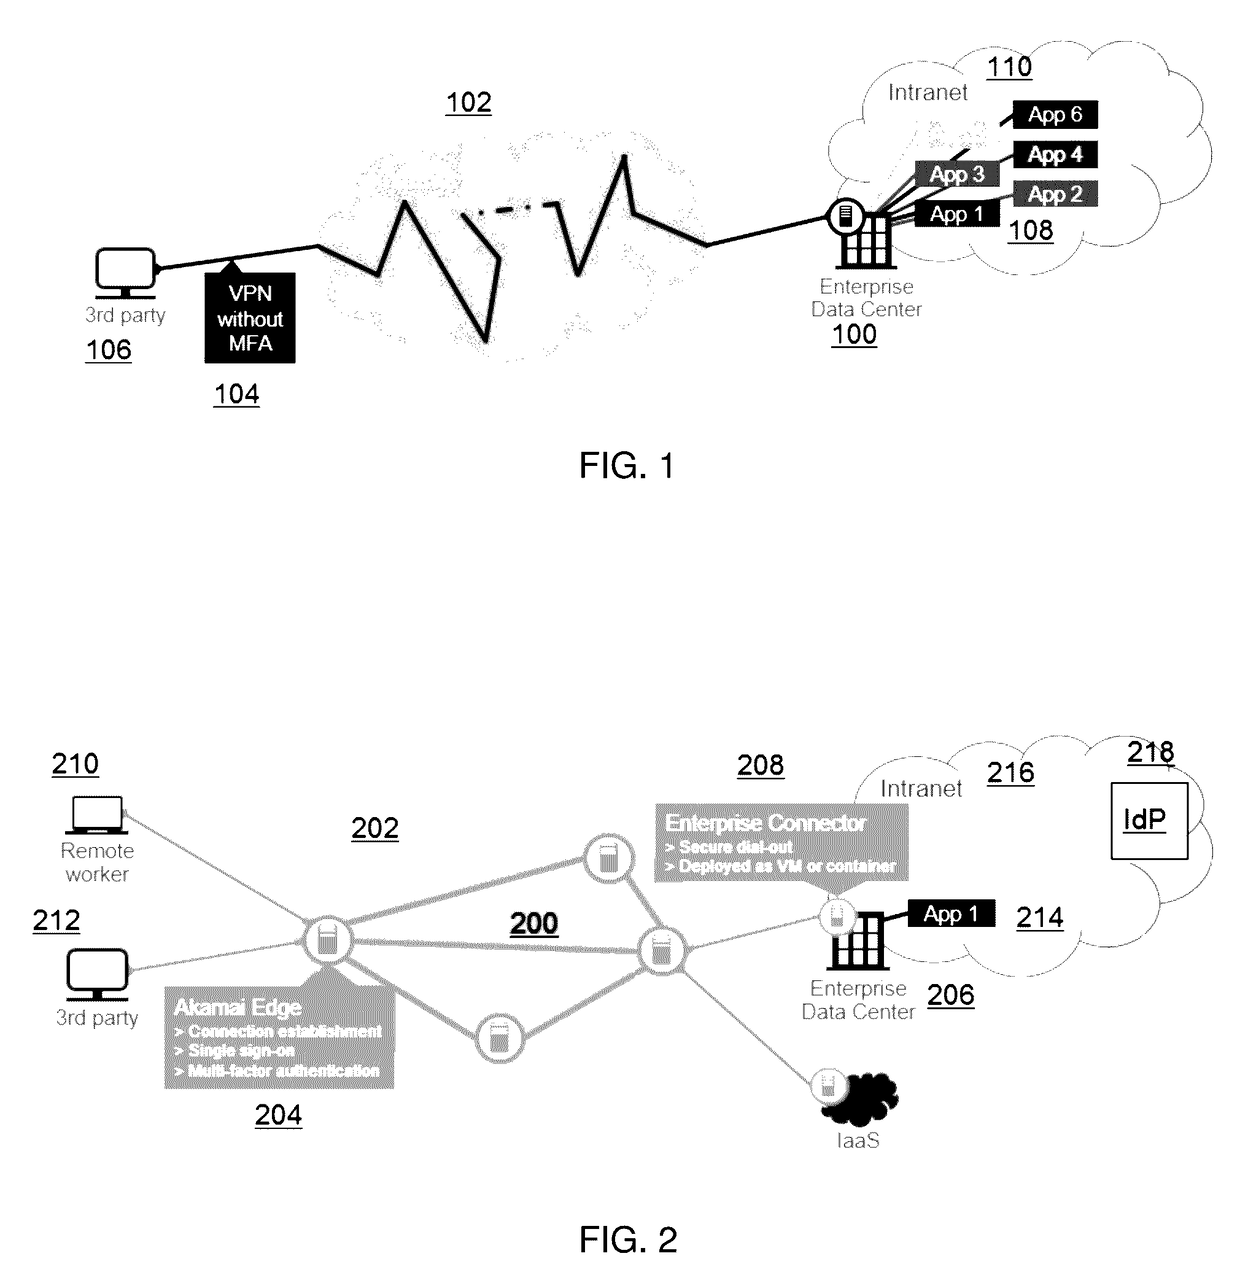 Uniquely identifying and securely communicating with an appliance in an uncontrolled network